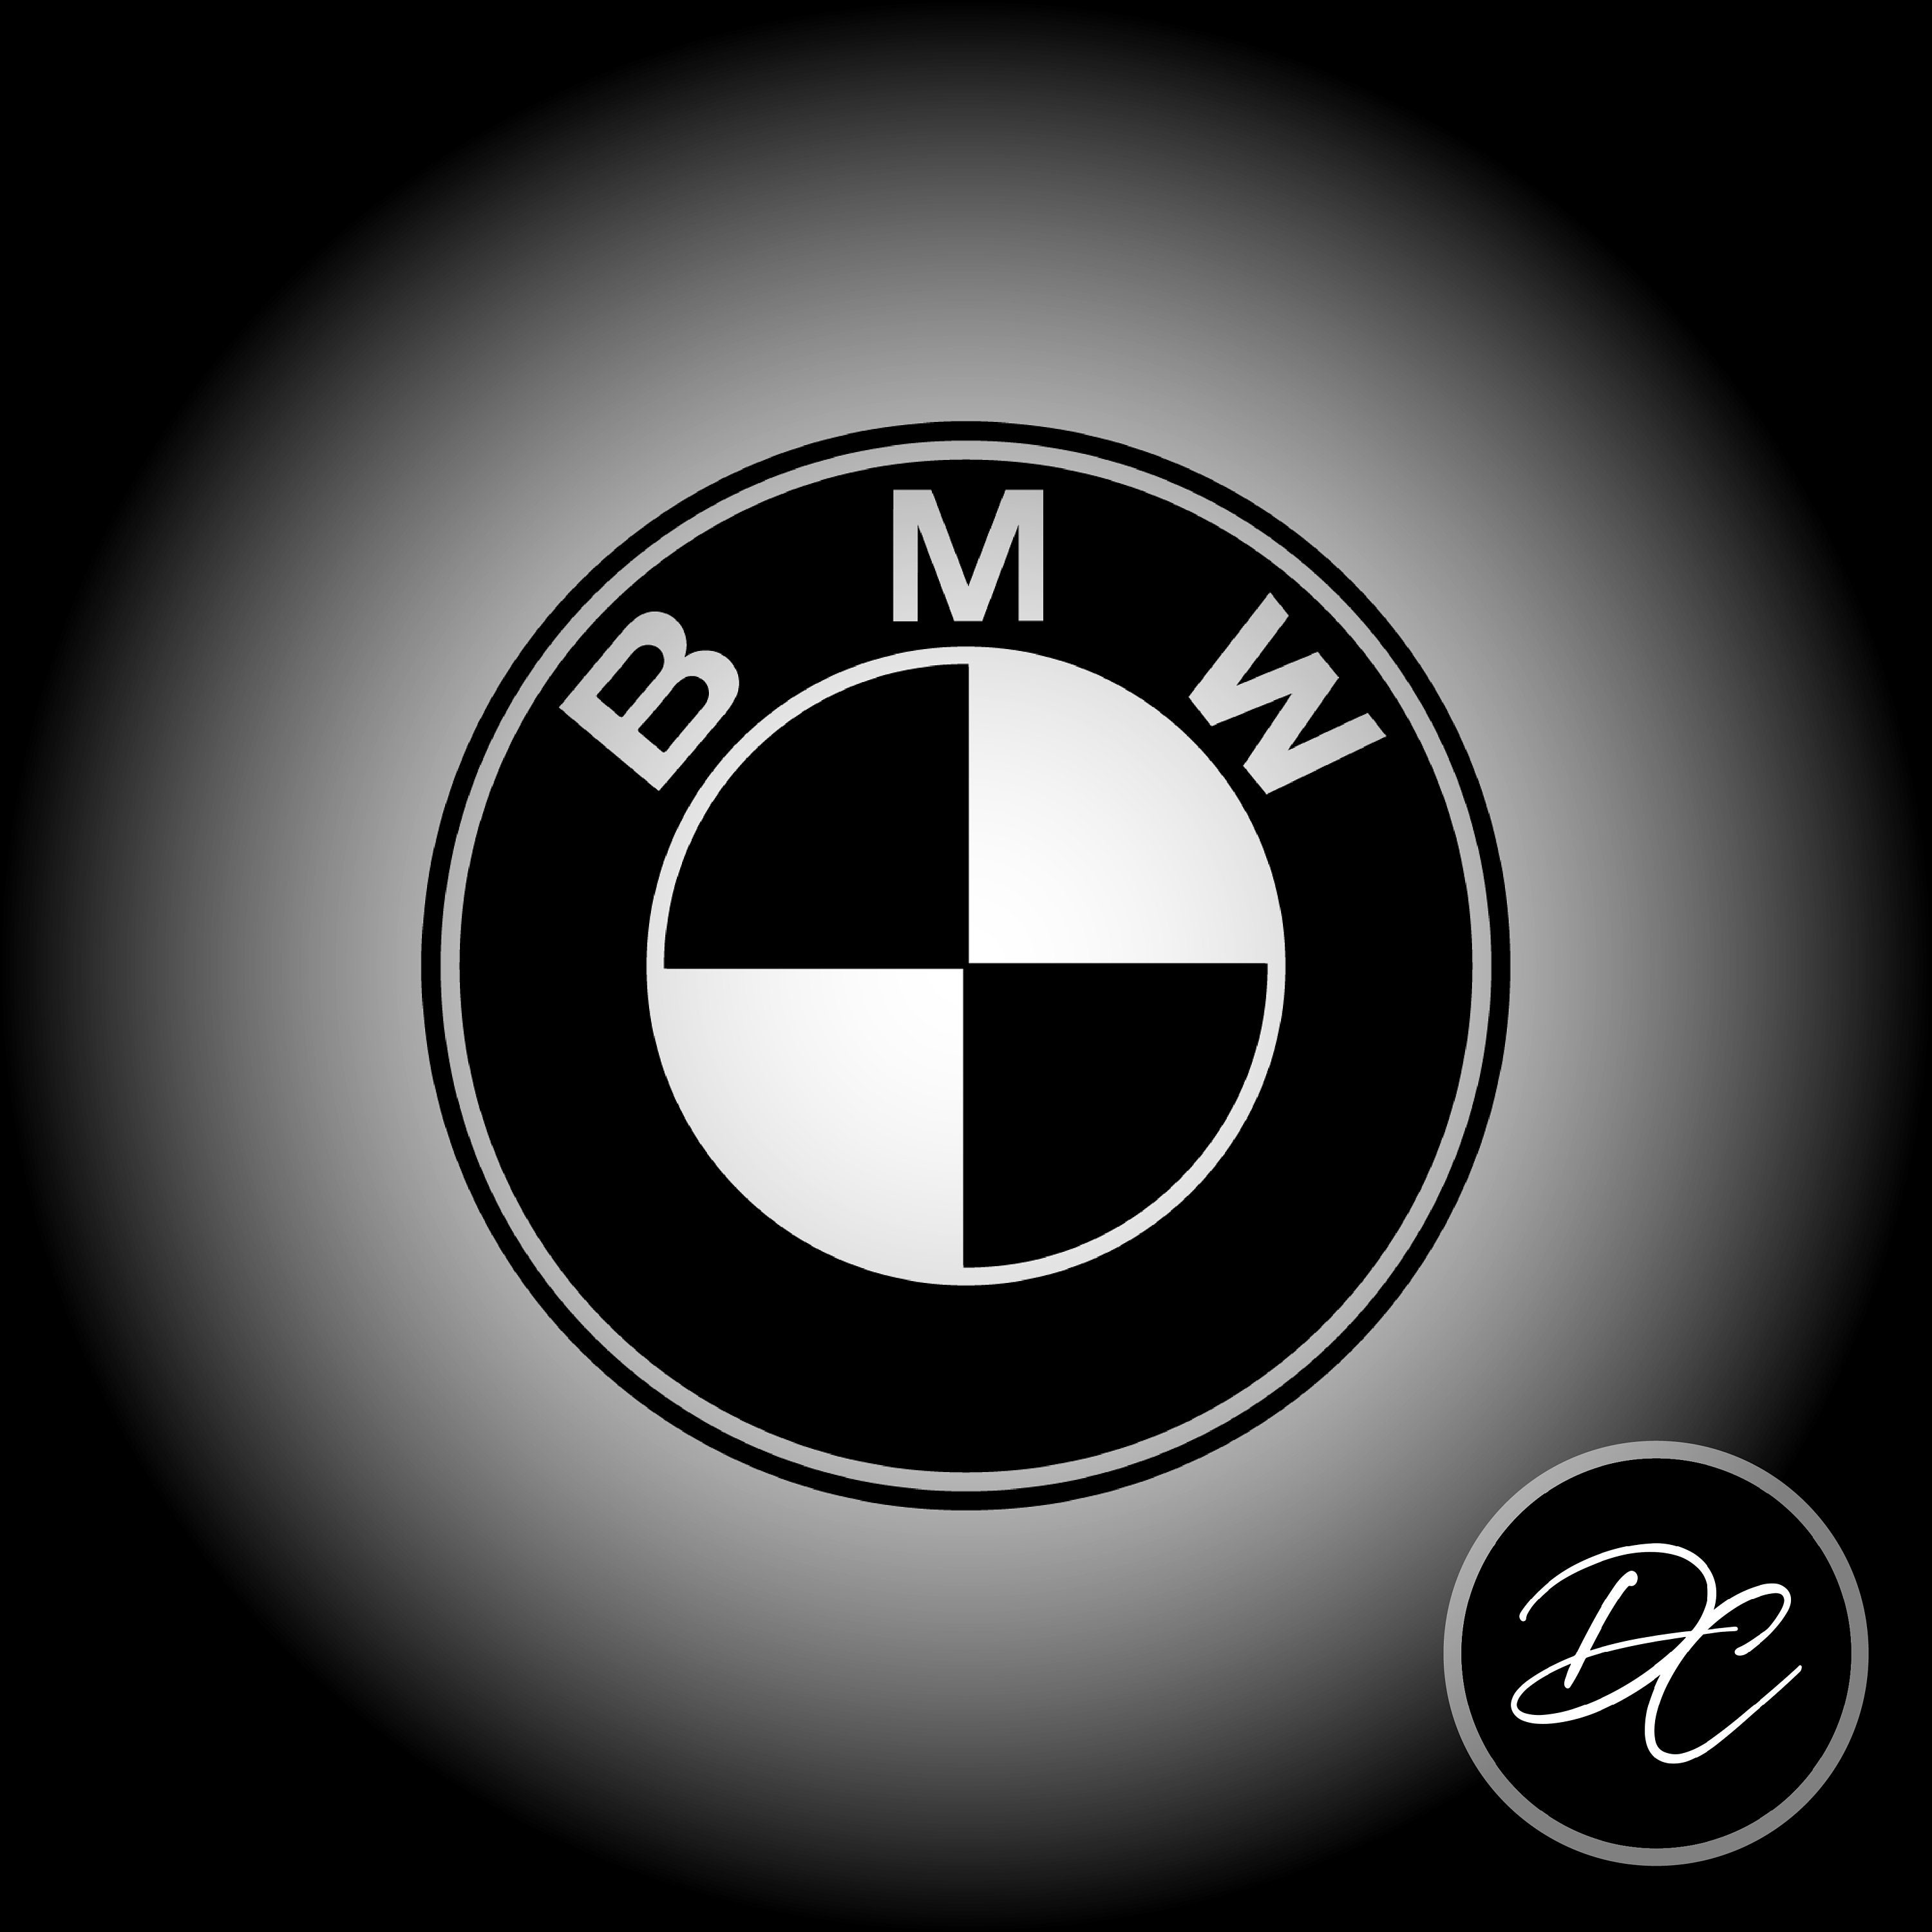 Bmw Decal Germany Euro Car Window Decal Laptop Decal Etsy 日本